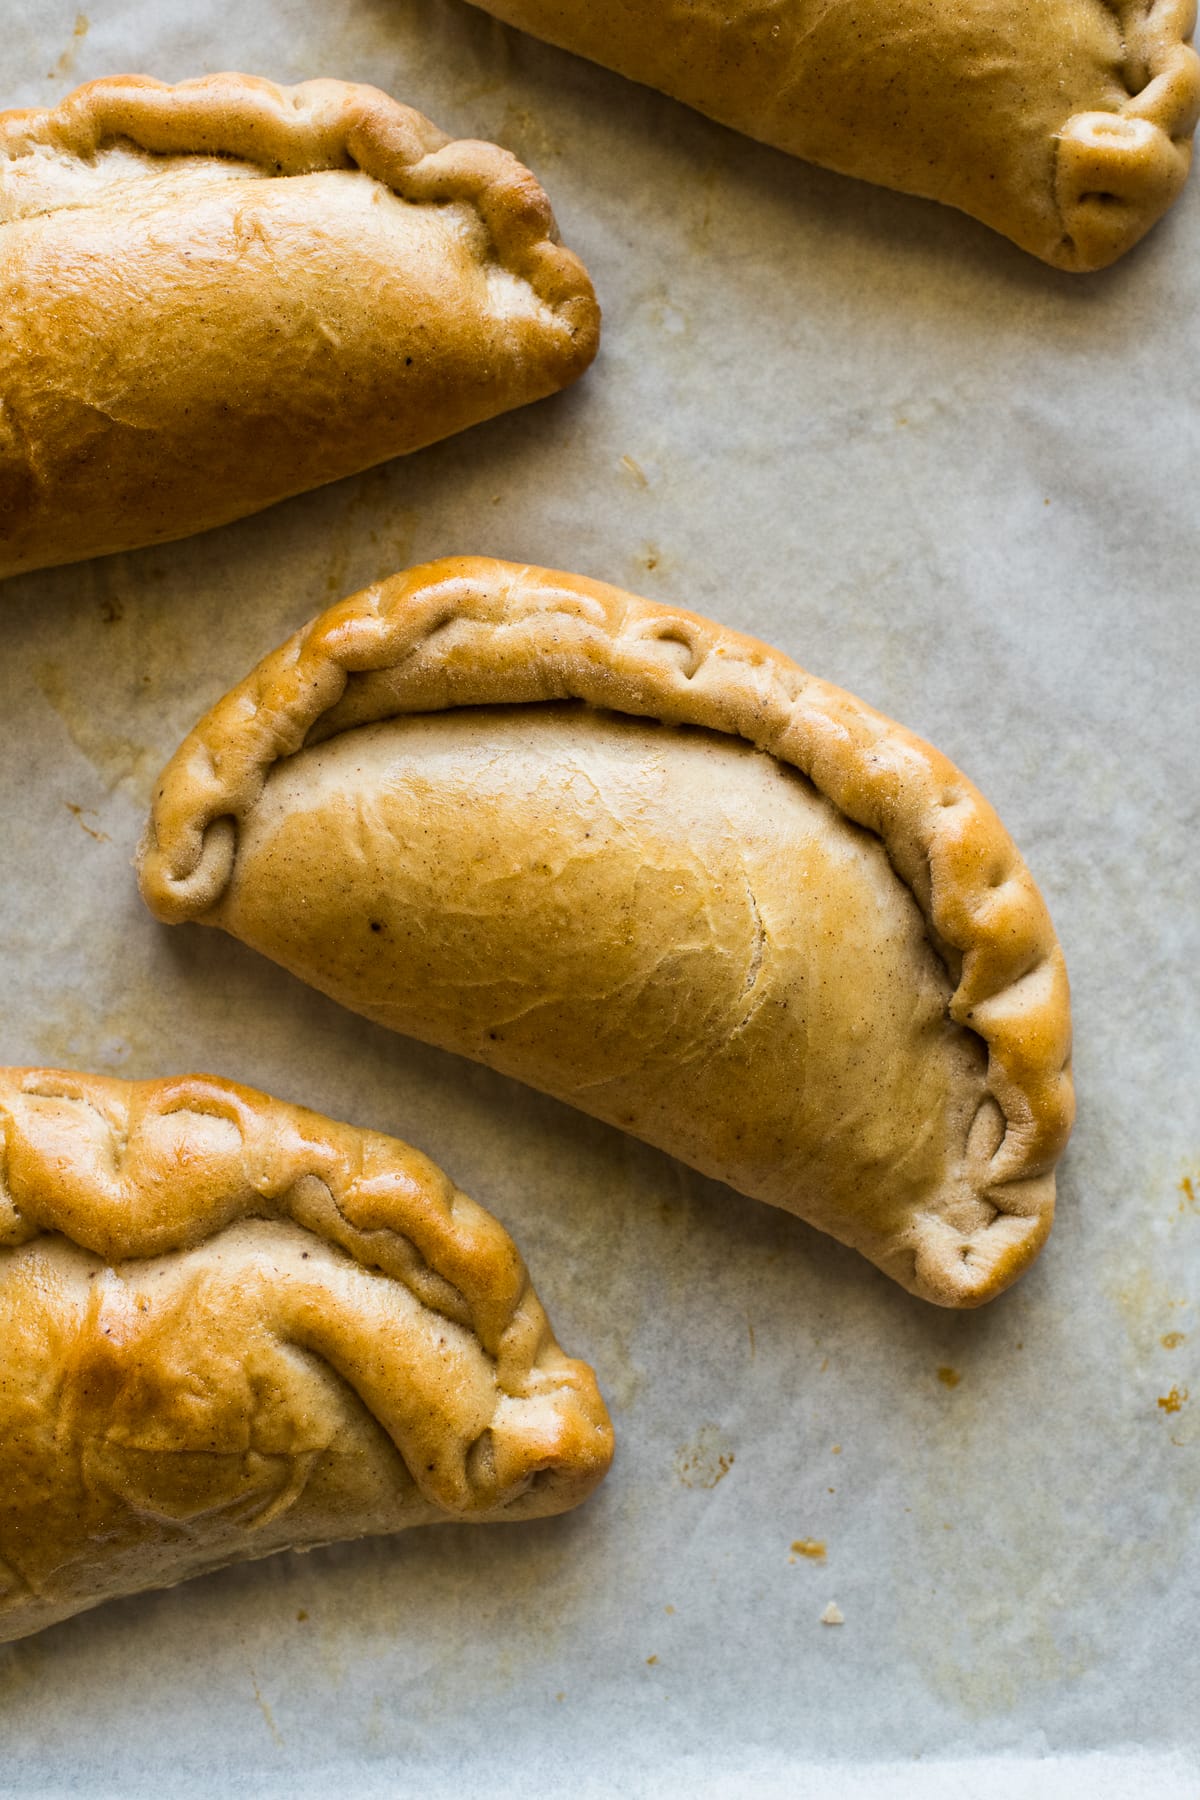 Pumpkin empanadas on a baking tray lined with parchment paper.